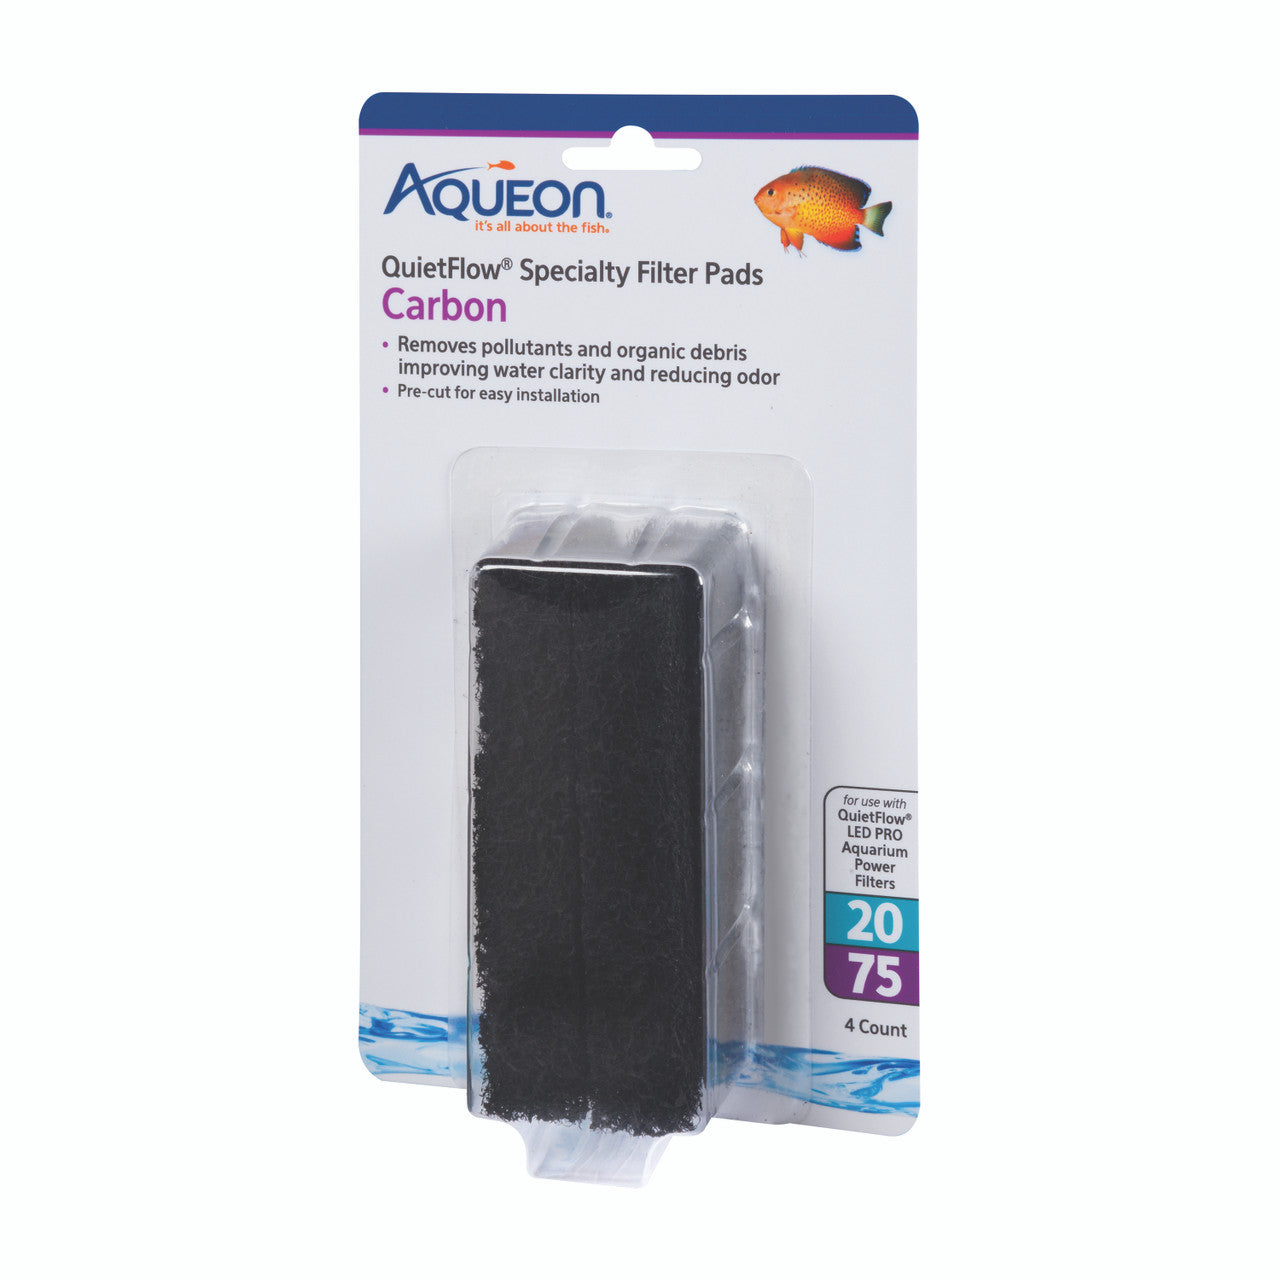 Aqueon Replacement Specialty Filter Pads Carbon 20/75